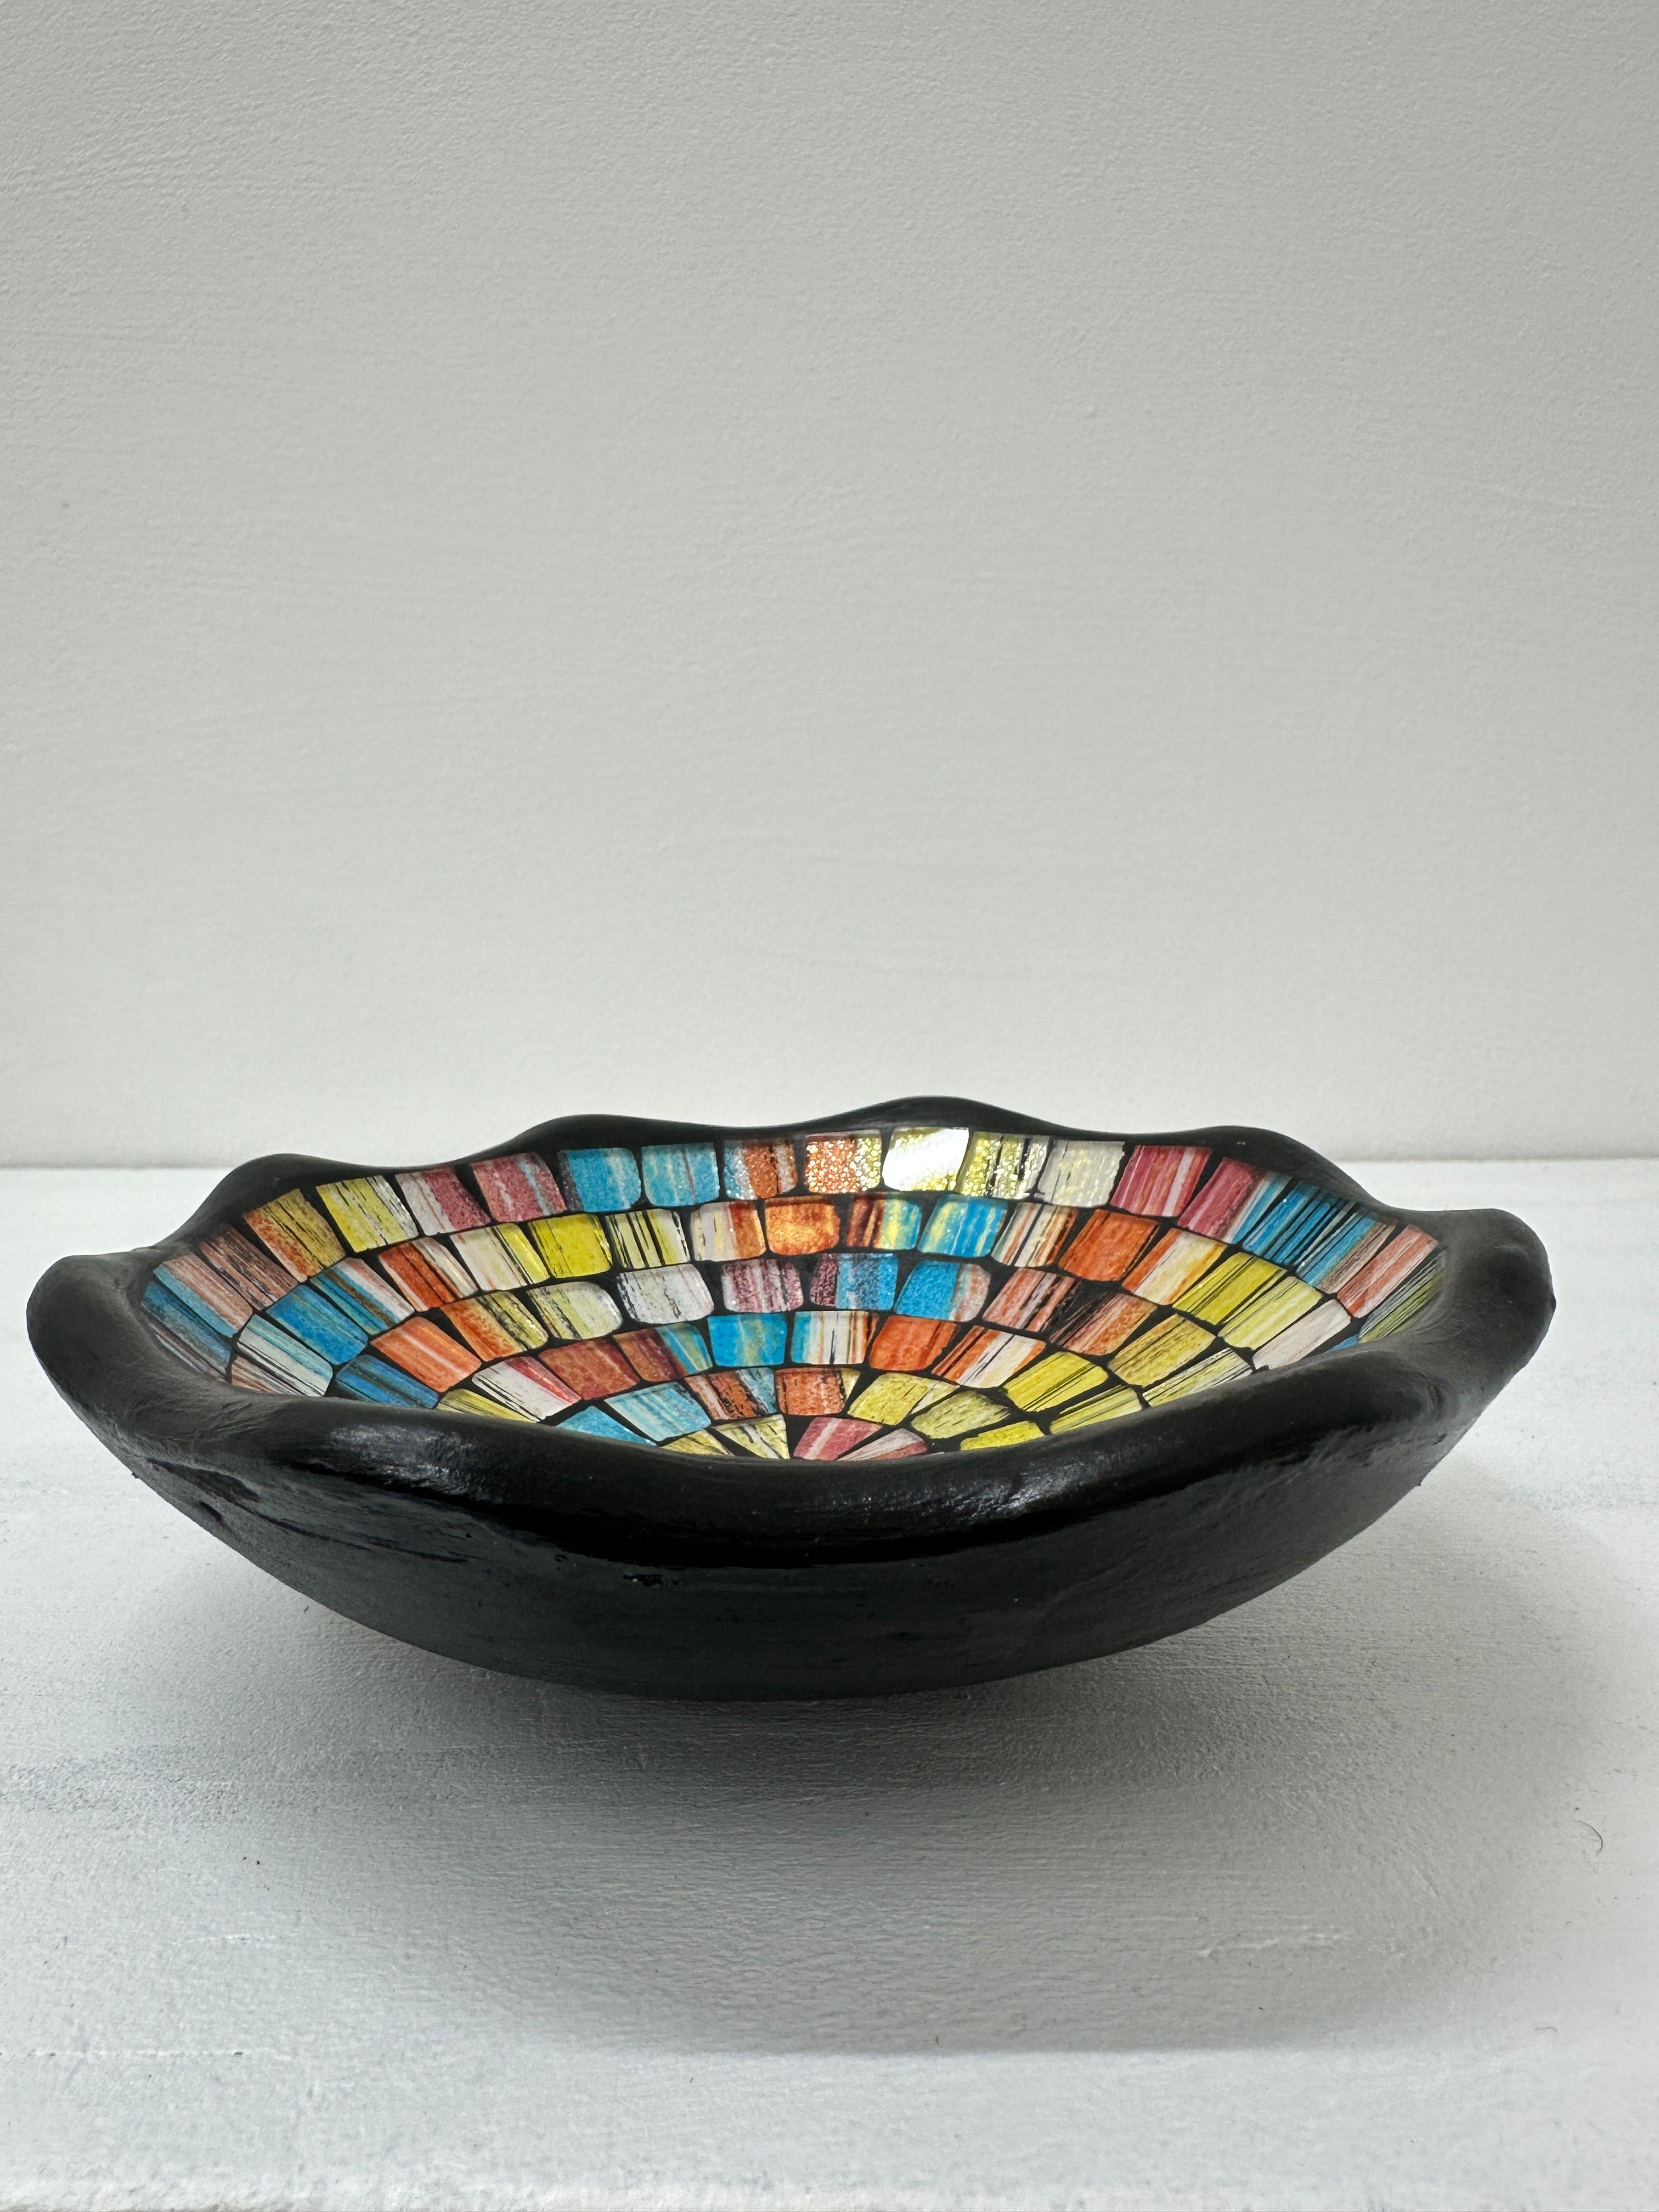 side view of mosaic bowl